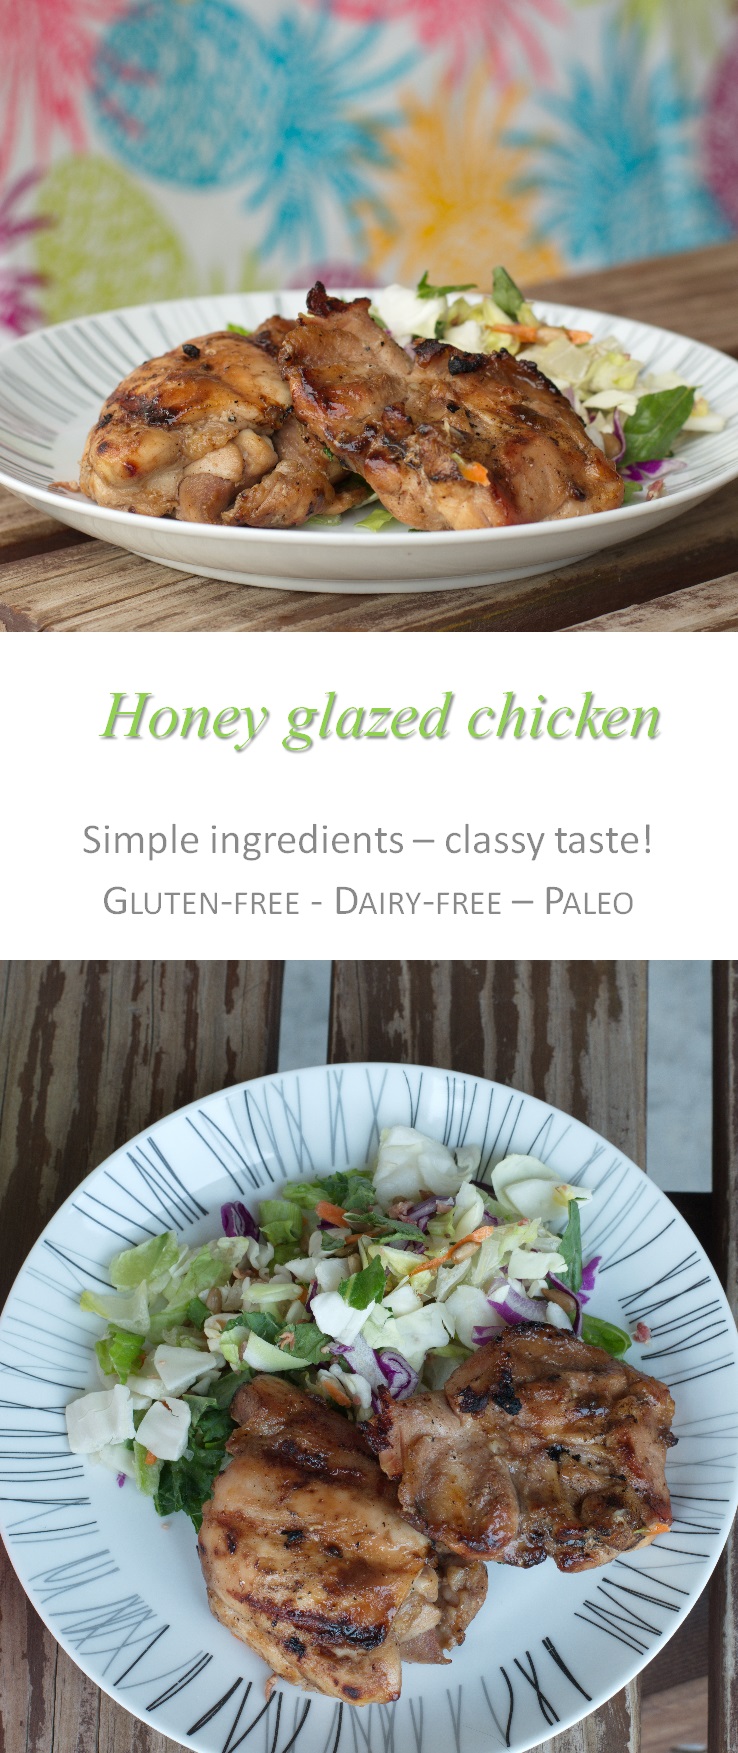 This honey glaze marinade is so simple and so versatile on any meats - sure to be the star of any BBQ! #honey #marinade #cookathome #glutenfree #dairyfree #paleo